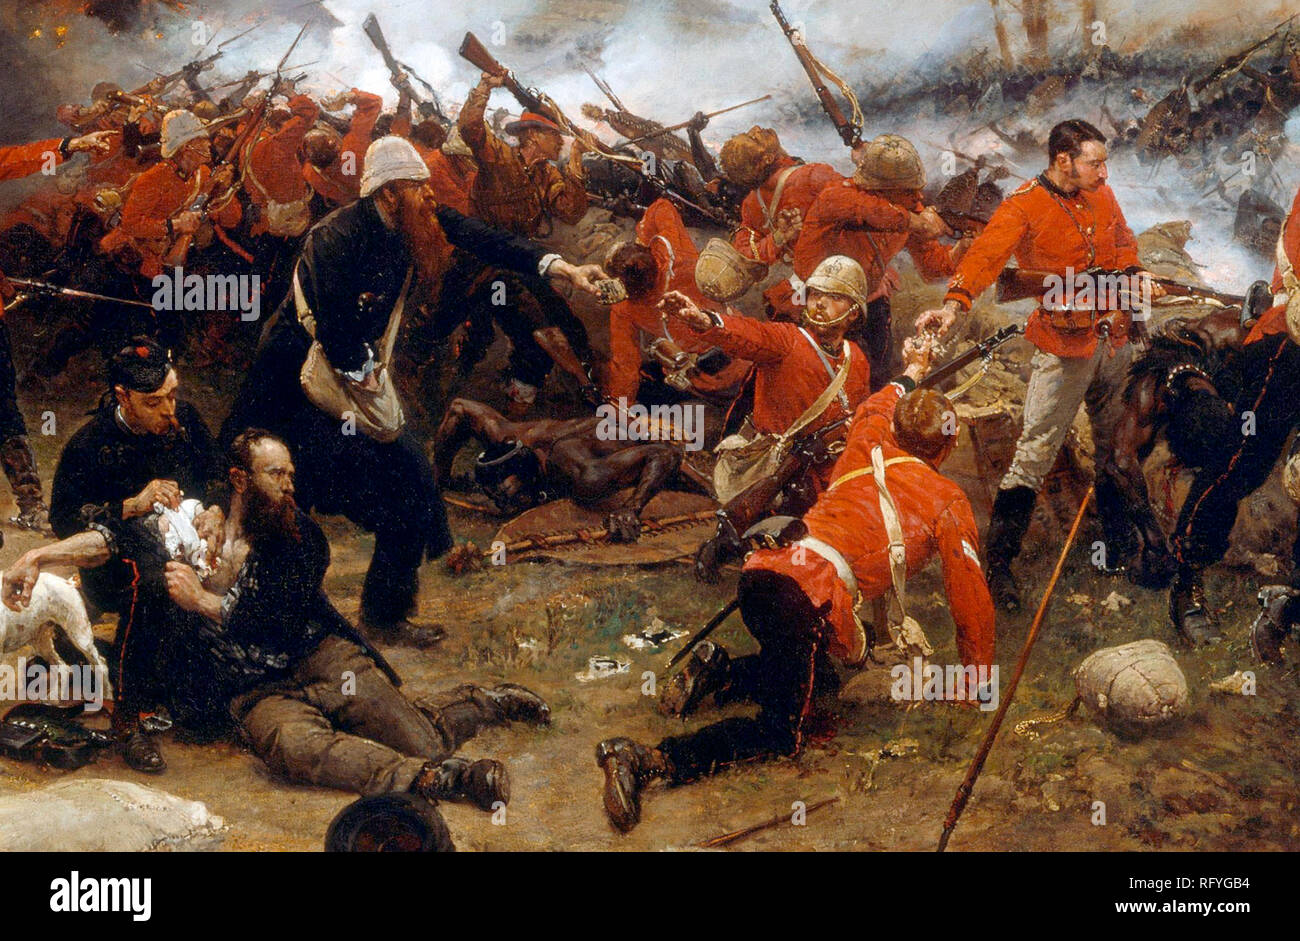 Detail of Battle of Rorke's Drift, The Anglo-Zulu War was fought in 1879 between the British Empire and the Zulu Kingdom Stock Photo